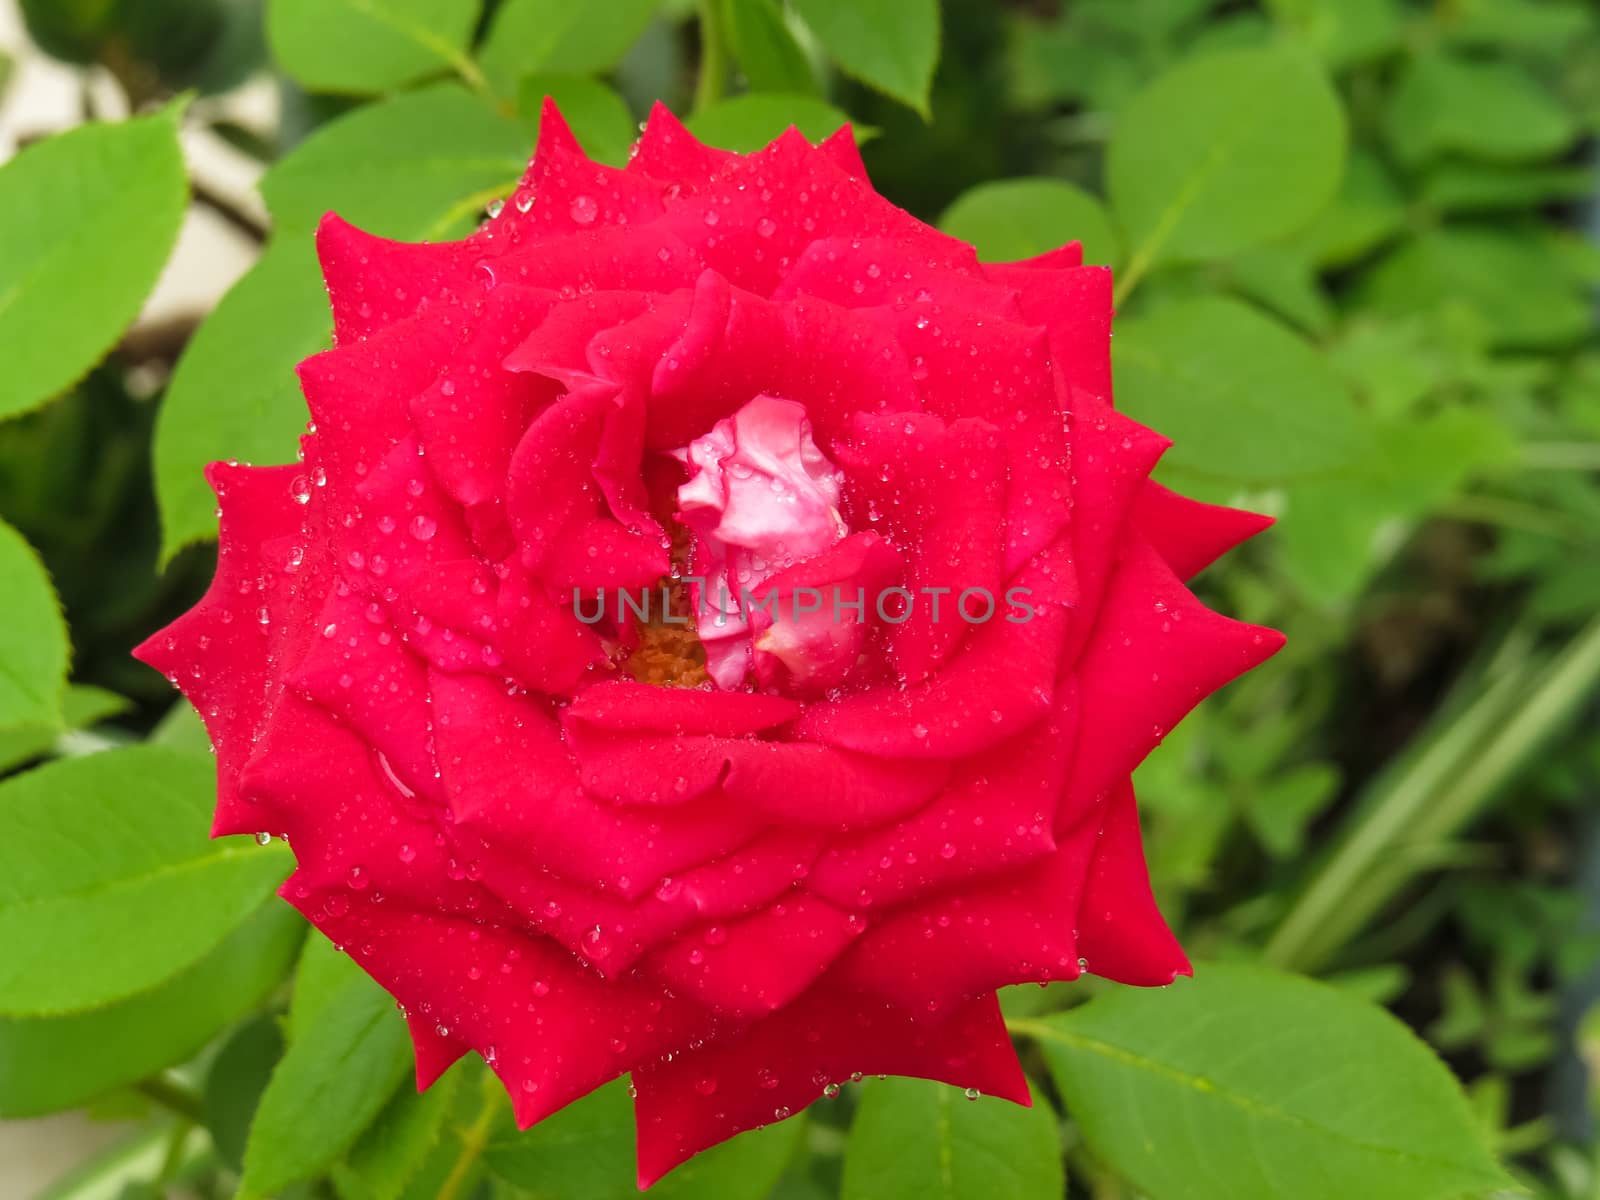 Blooming red rose with water droplets on its petals. by silviopl